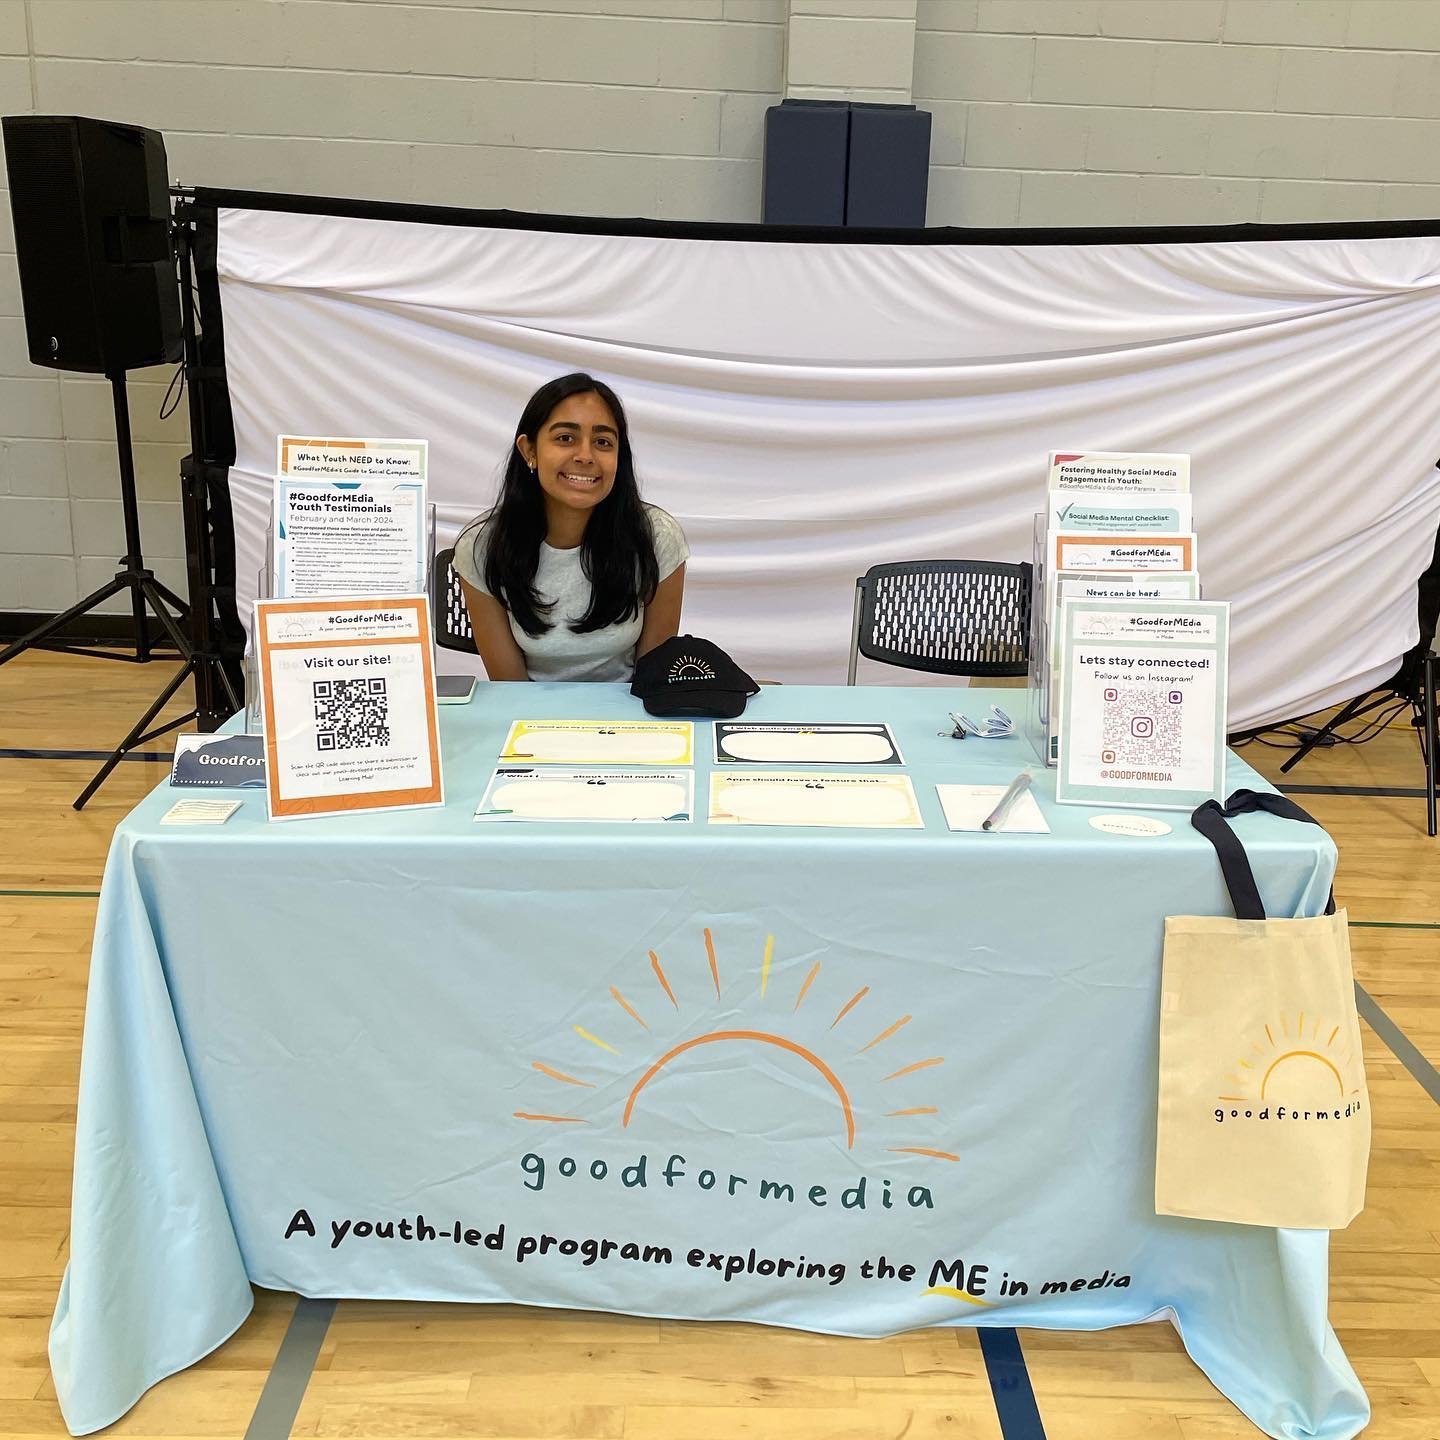 Our team member Naiya represented GFM a couple of weeks ago at the @sancarlosyouthcenter Teen Wellness Retreat, and it was SO much fun. Our workshop had a variety of participants with so much wisdom to share around their experiences navigating the te